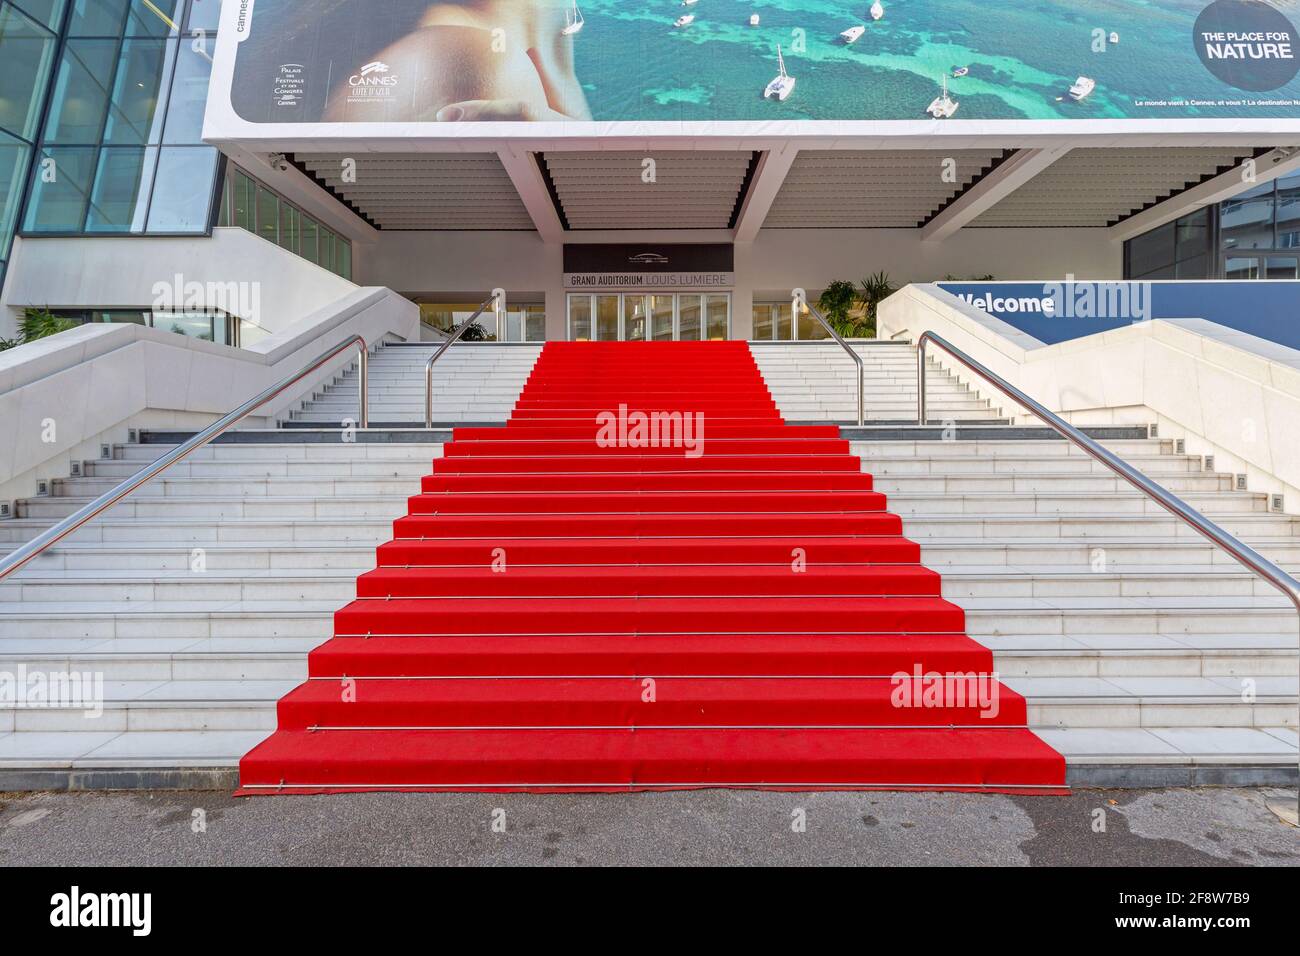 Cannes, France - February 1, 2016: Empty Red Carpet at Famous Festival Hall  Louis Lumiere in Cannes, France Stock Photo - Alamy